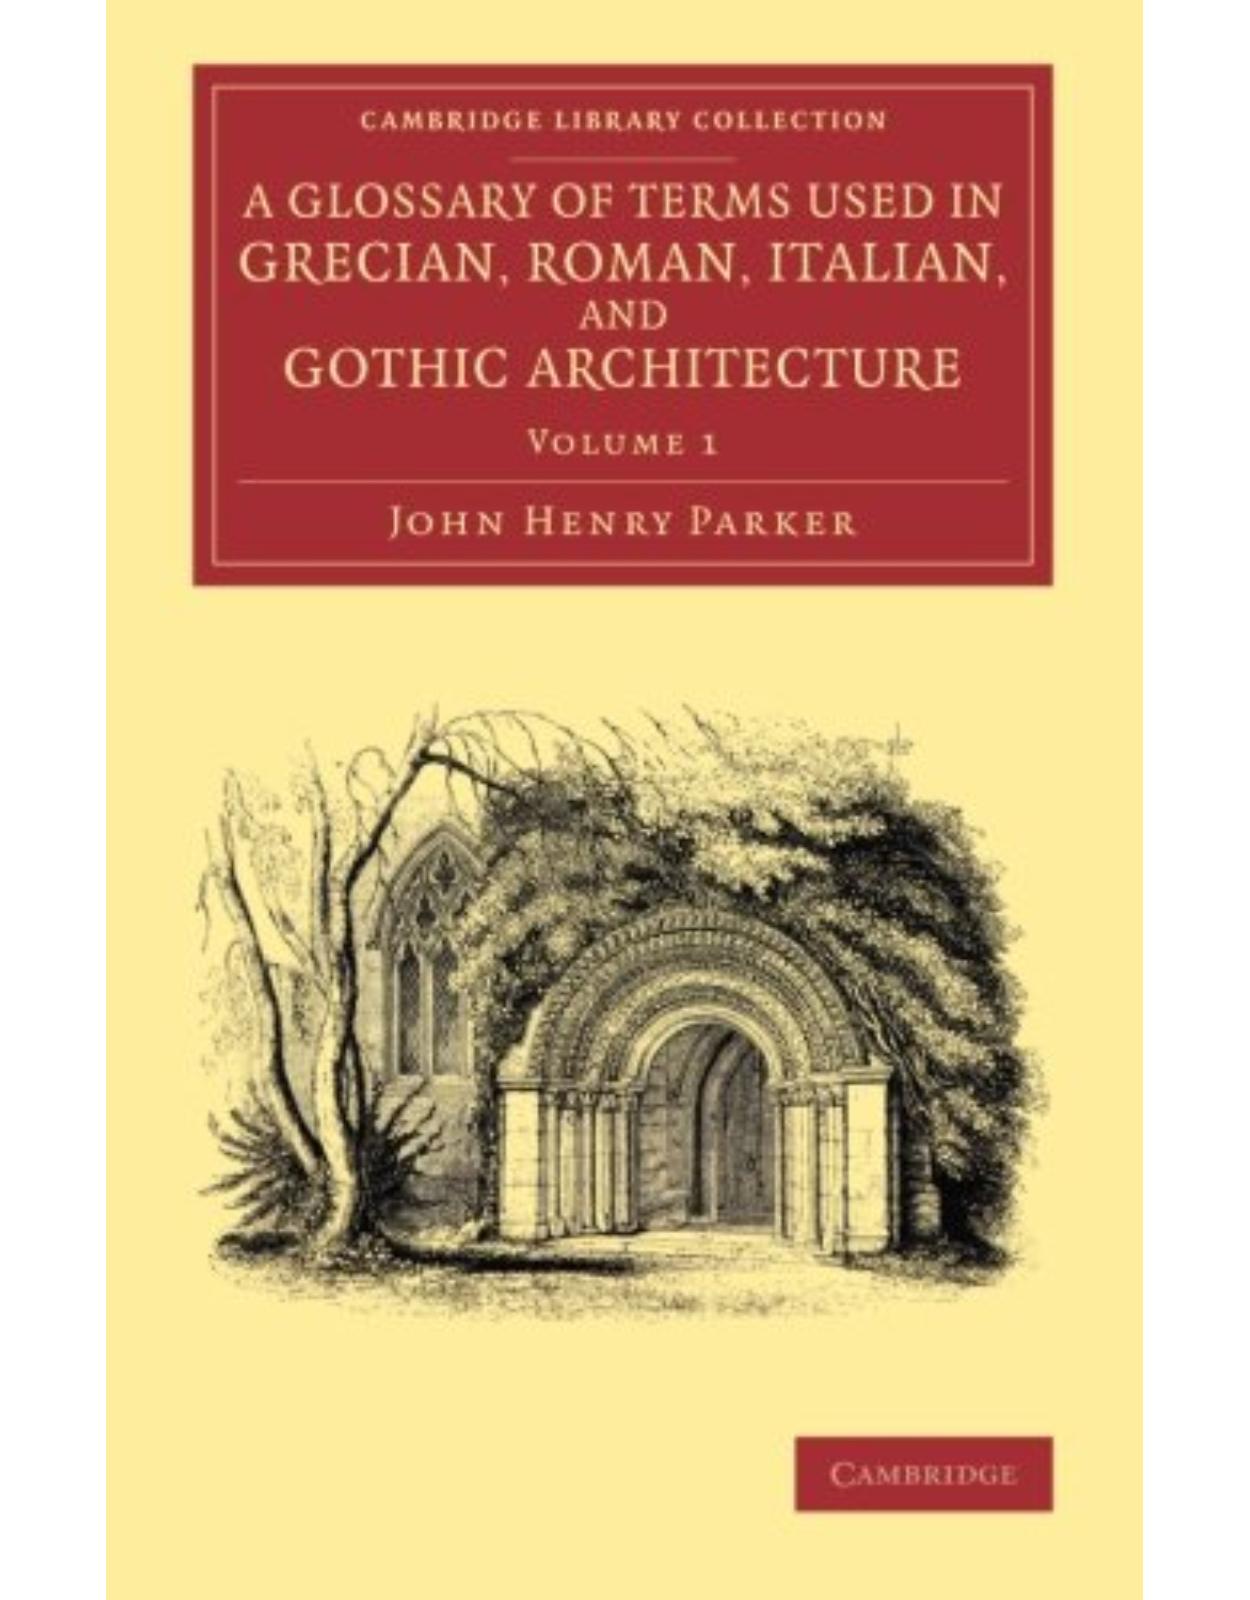 A Glossary of Terms Used in Grecian, Roman, Italian, and Gothic Architecture: Volume 1 (Cambridge Library Collection - Art and Architecture)